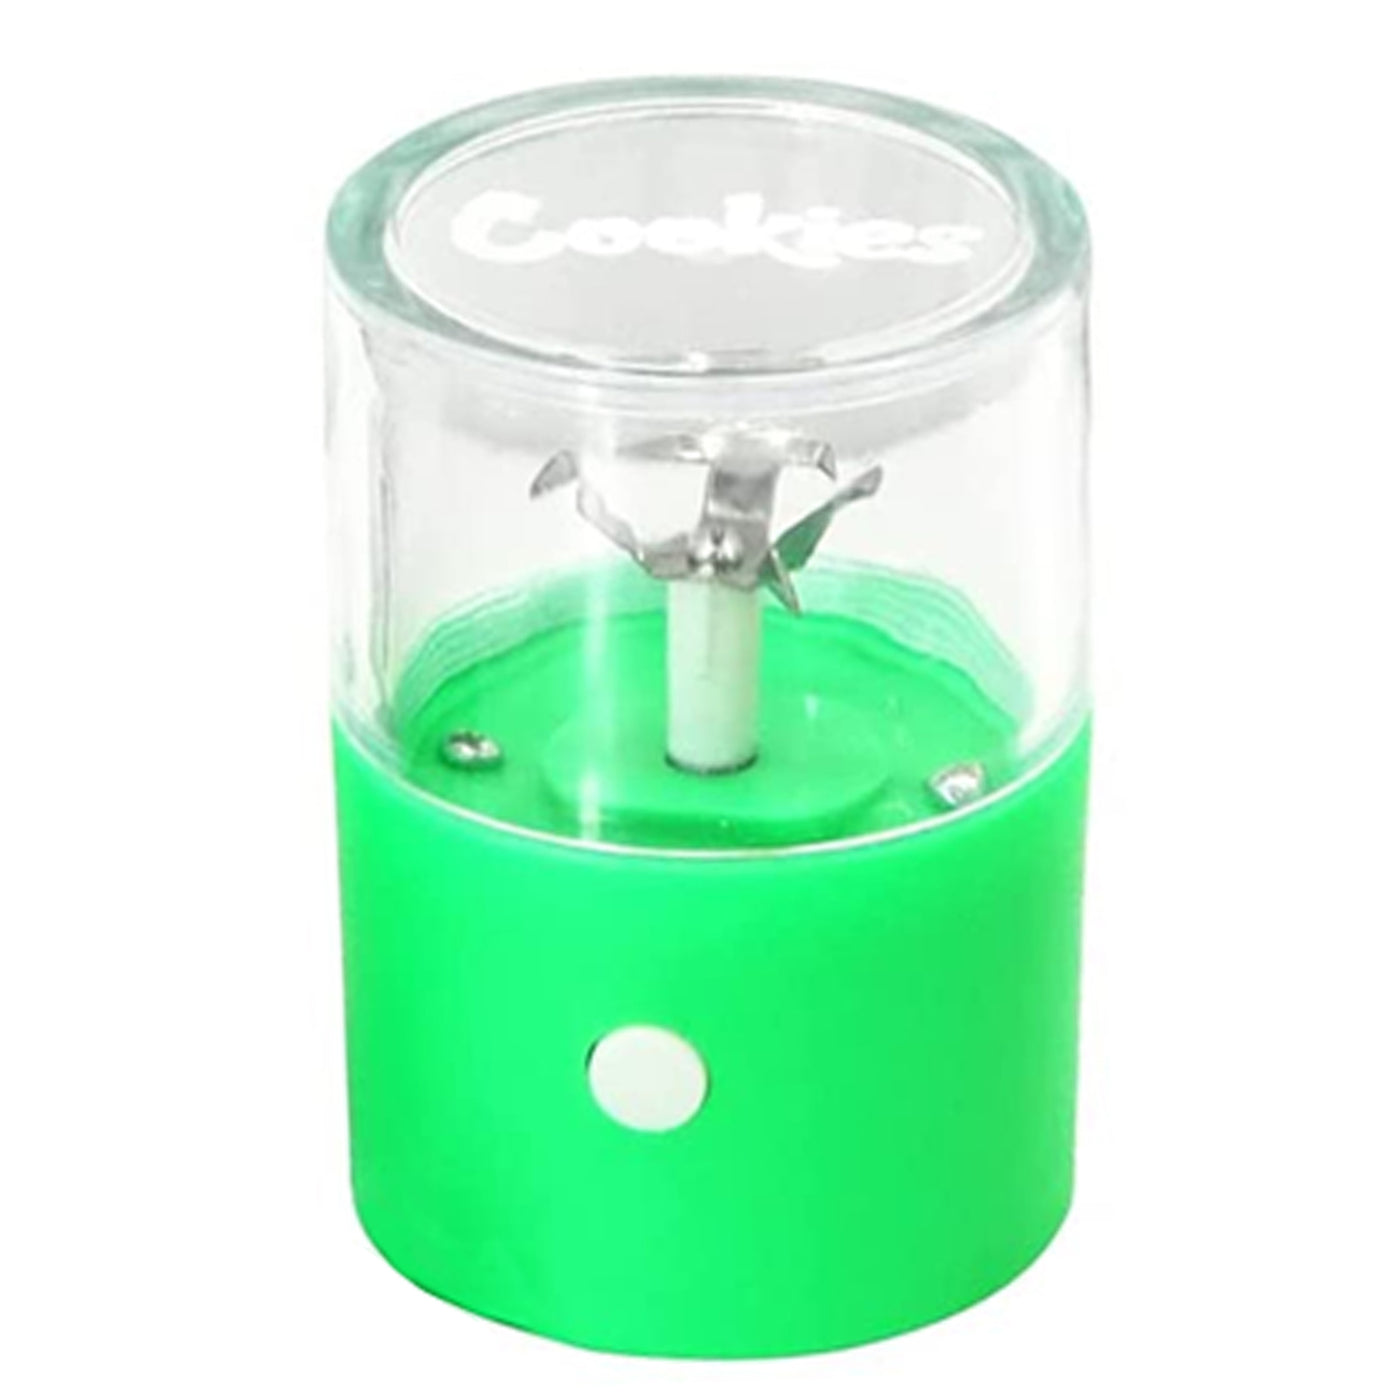 Cookies Cell Phone Electric Herbal Grinder Spice Crusher